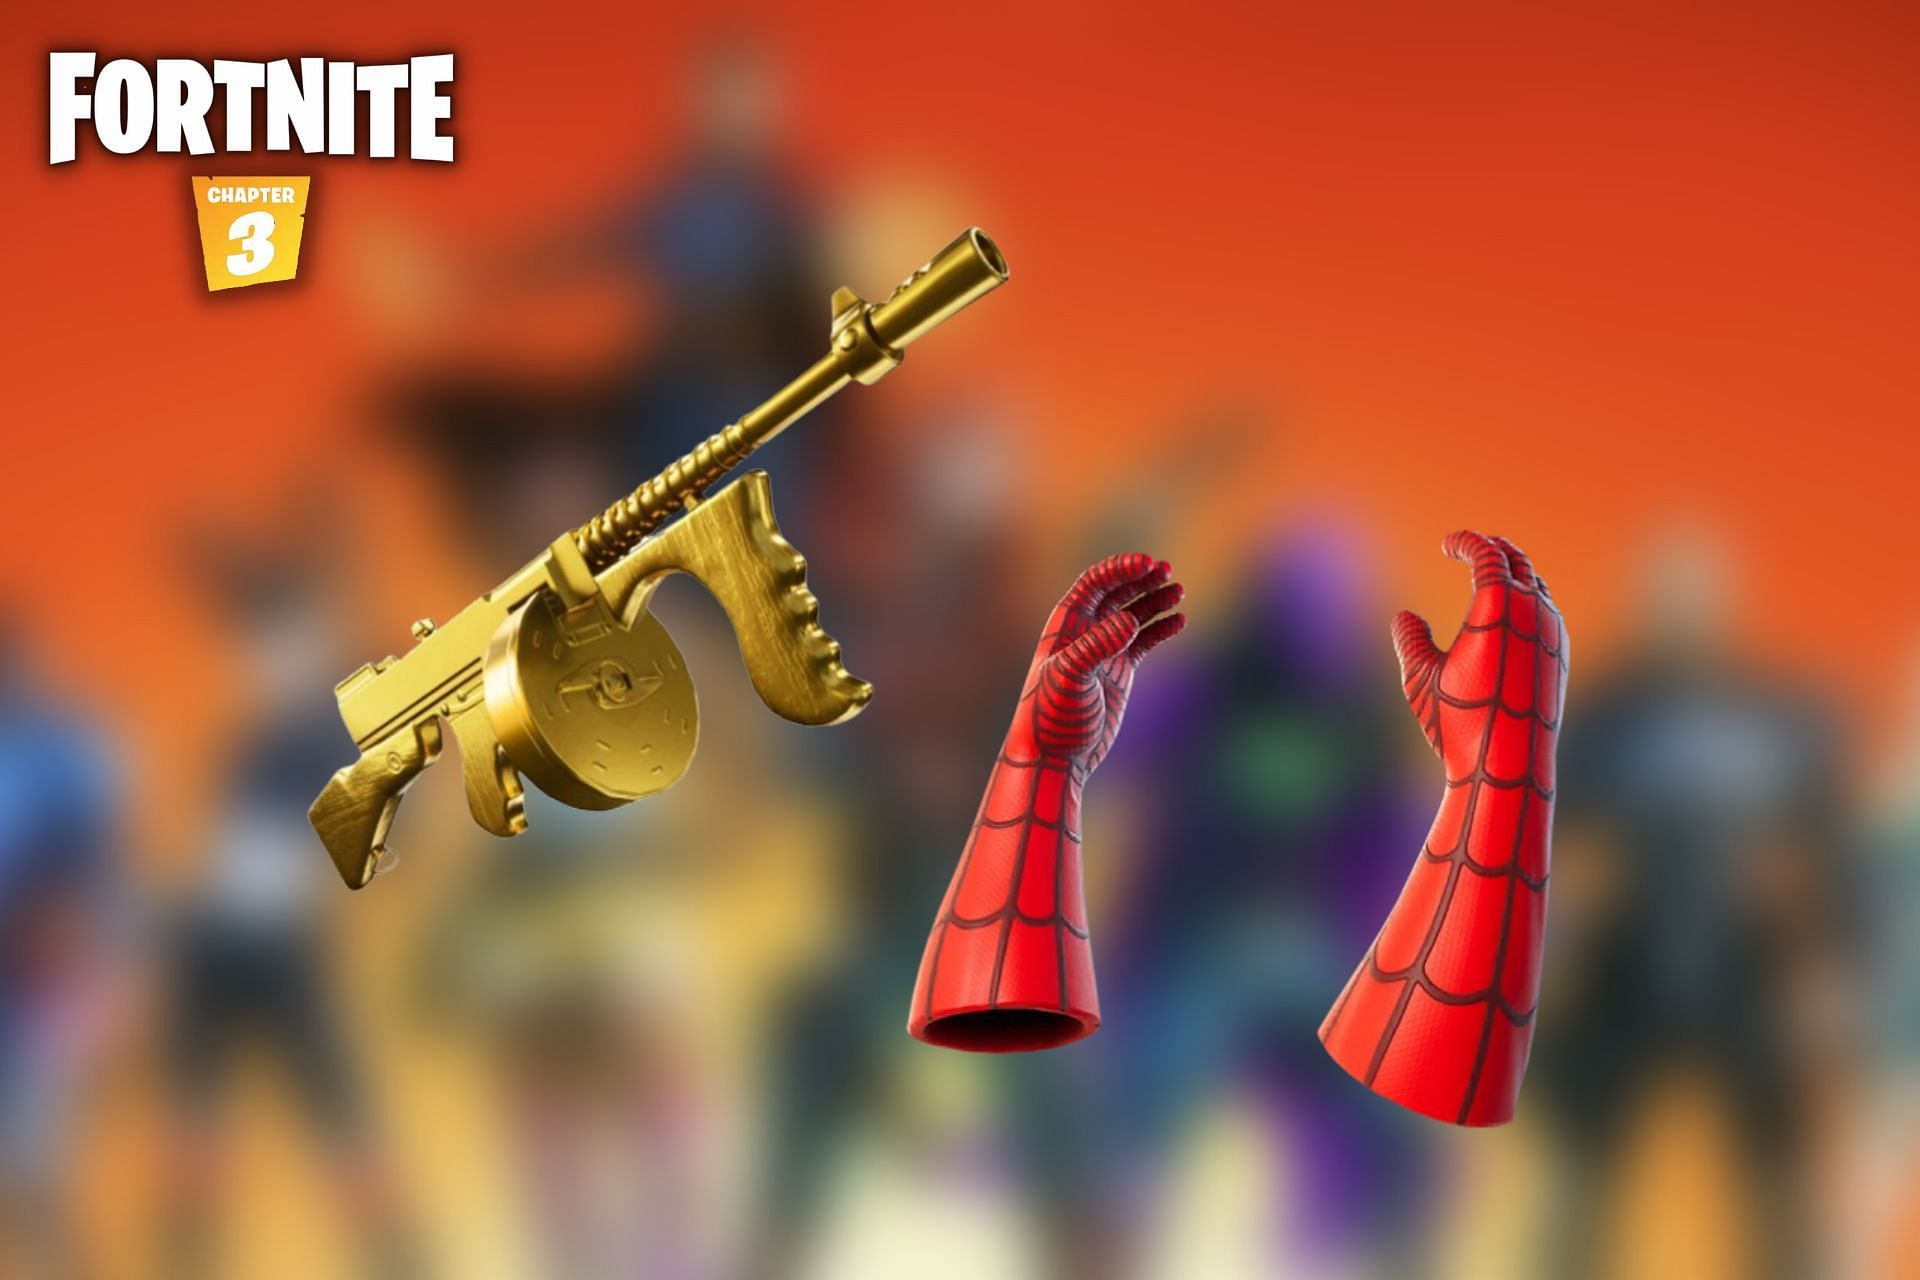 Mythic weapons are part of the list that need to return in Fortnite Chapter 3 Season 2 (Image via Sportskeeda)